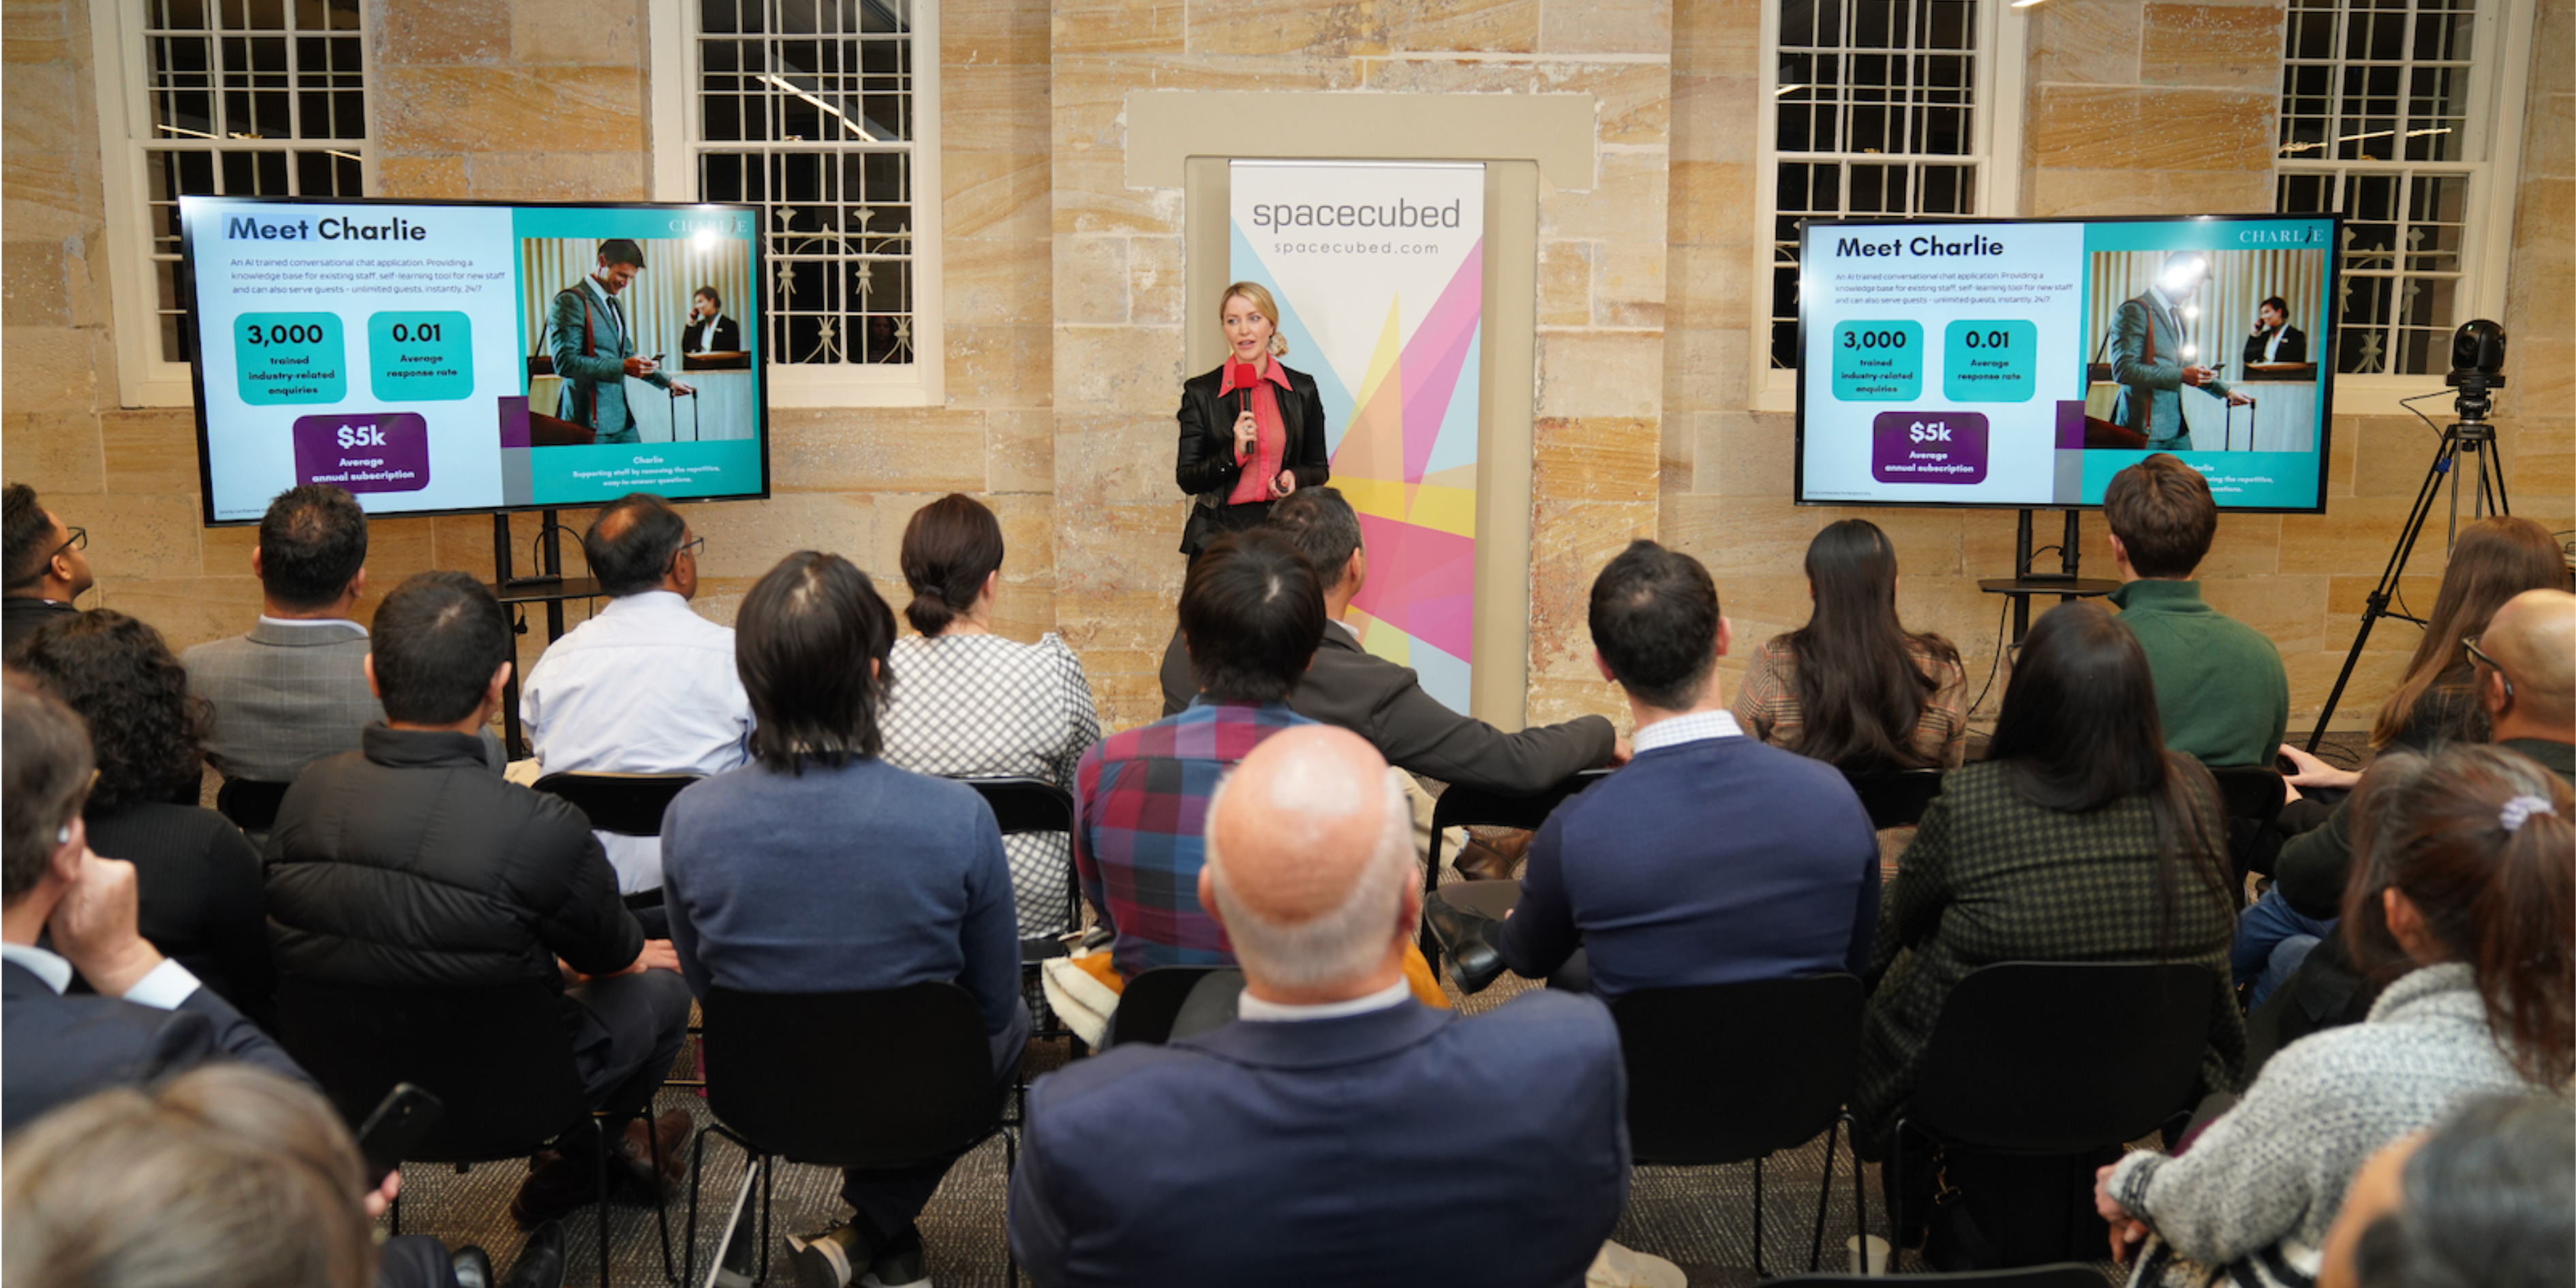 Entrepreneurs in Western Sydney are invited to ignite their startup journey through Plus Eight Pre-Accelerator program